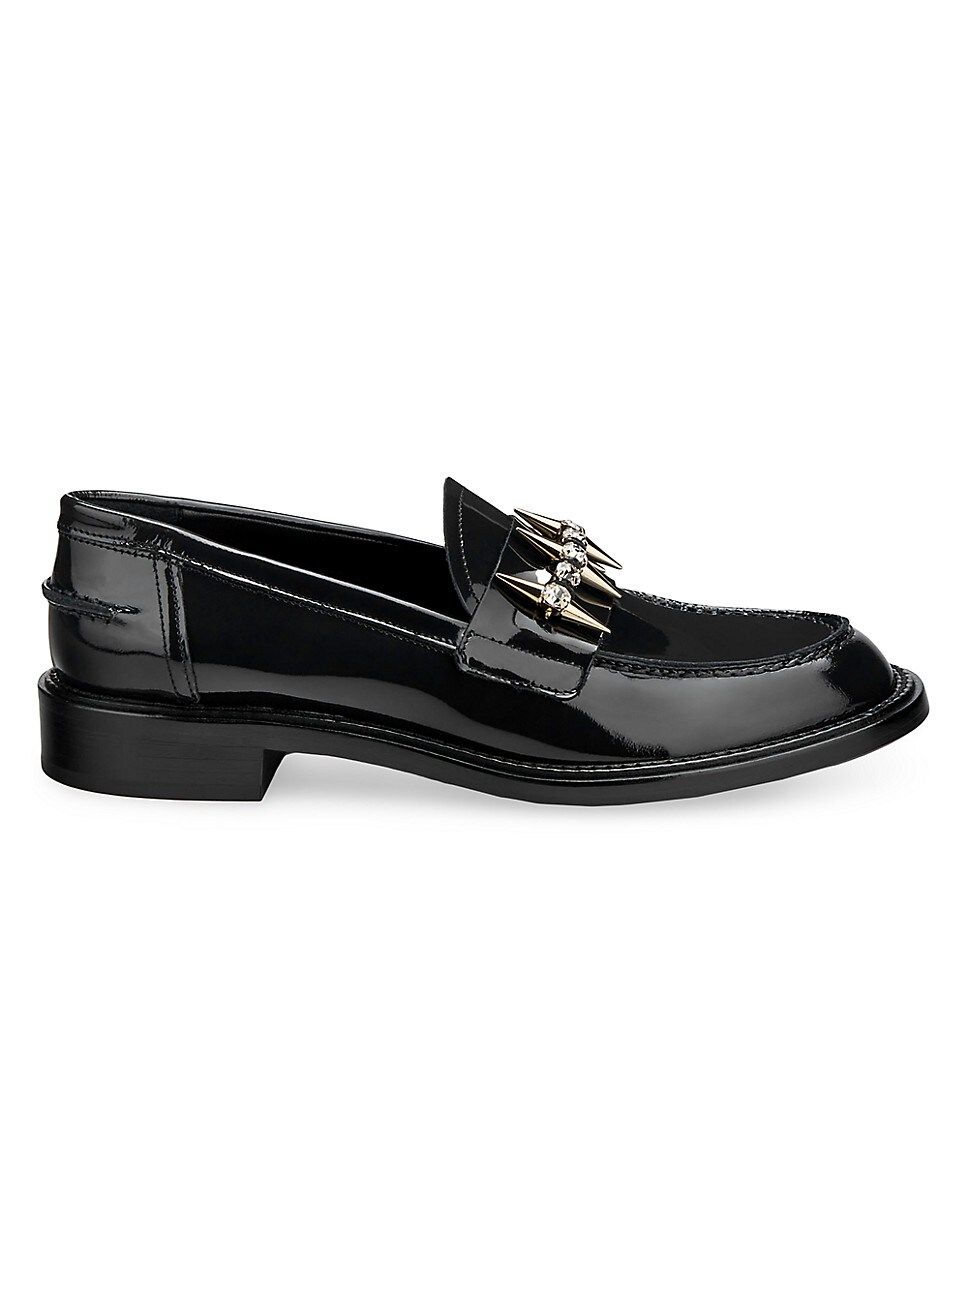 Lola 25MM Spike Patent Leather Loafers | Saks Fifth Avenue